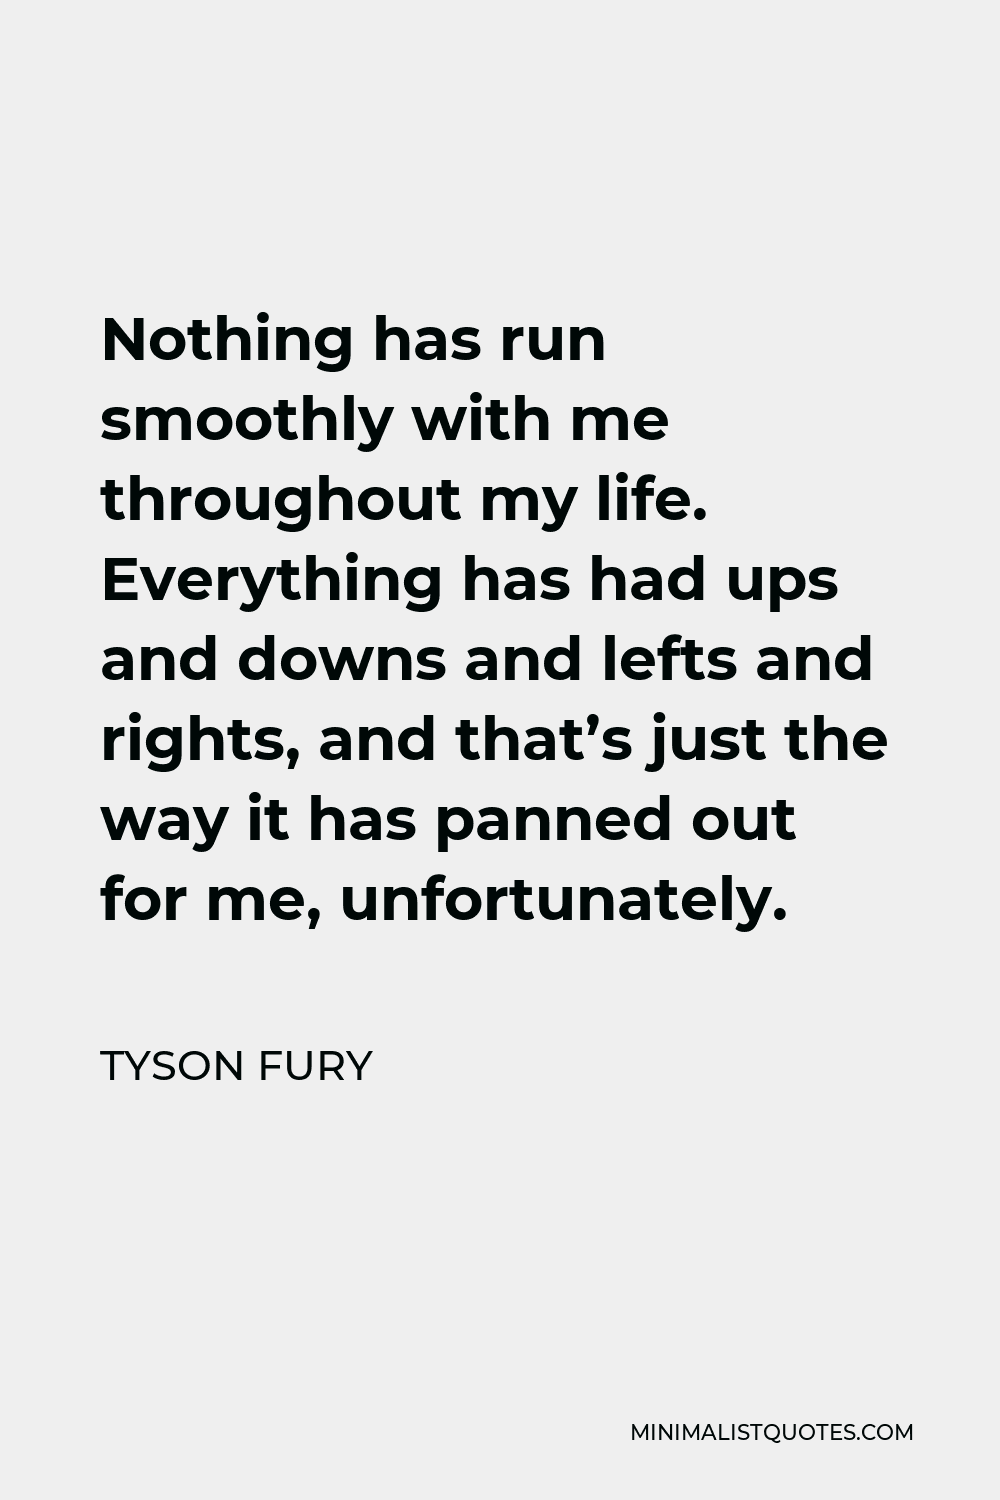 Tyson Fury Quote - Nothing has run smoothly with me throughout my life. Everything has had ups and downs and lefts and rights, and that’s just the way it has panned out for me, unfortunately.